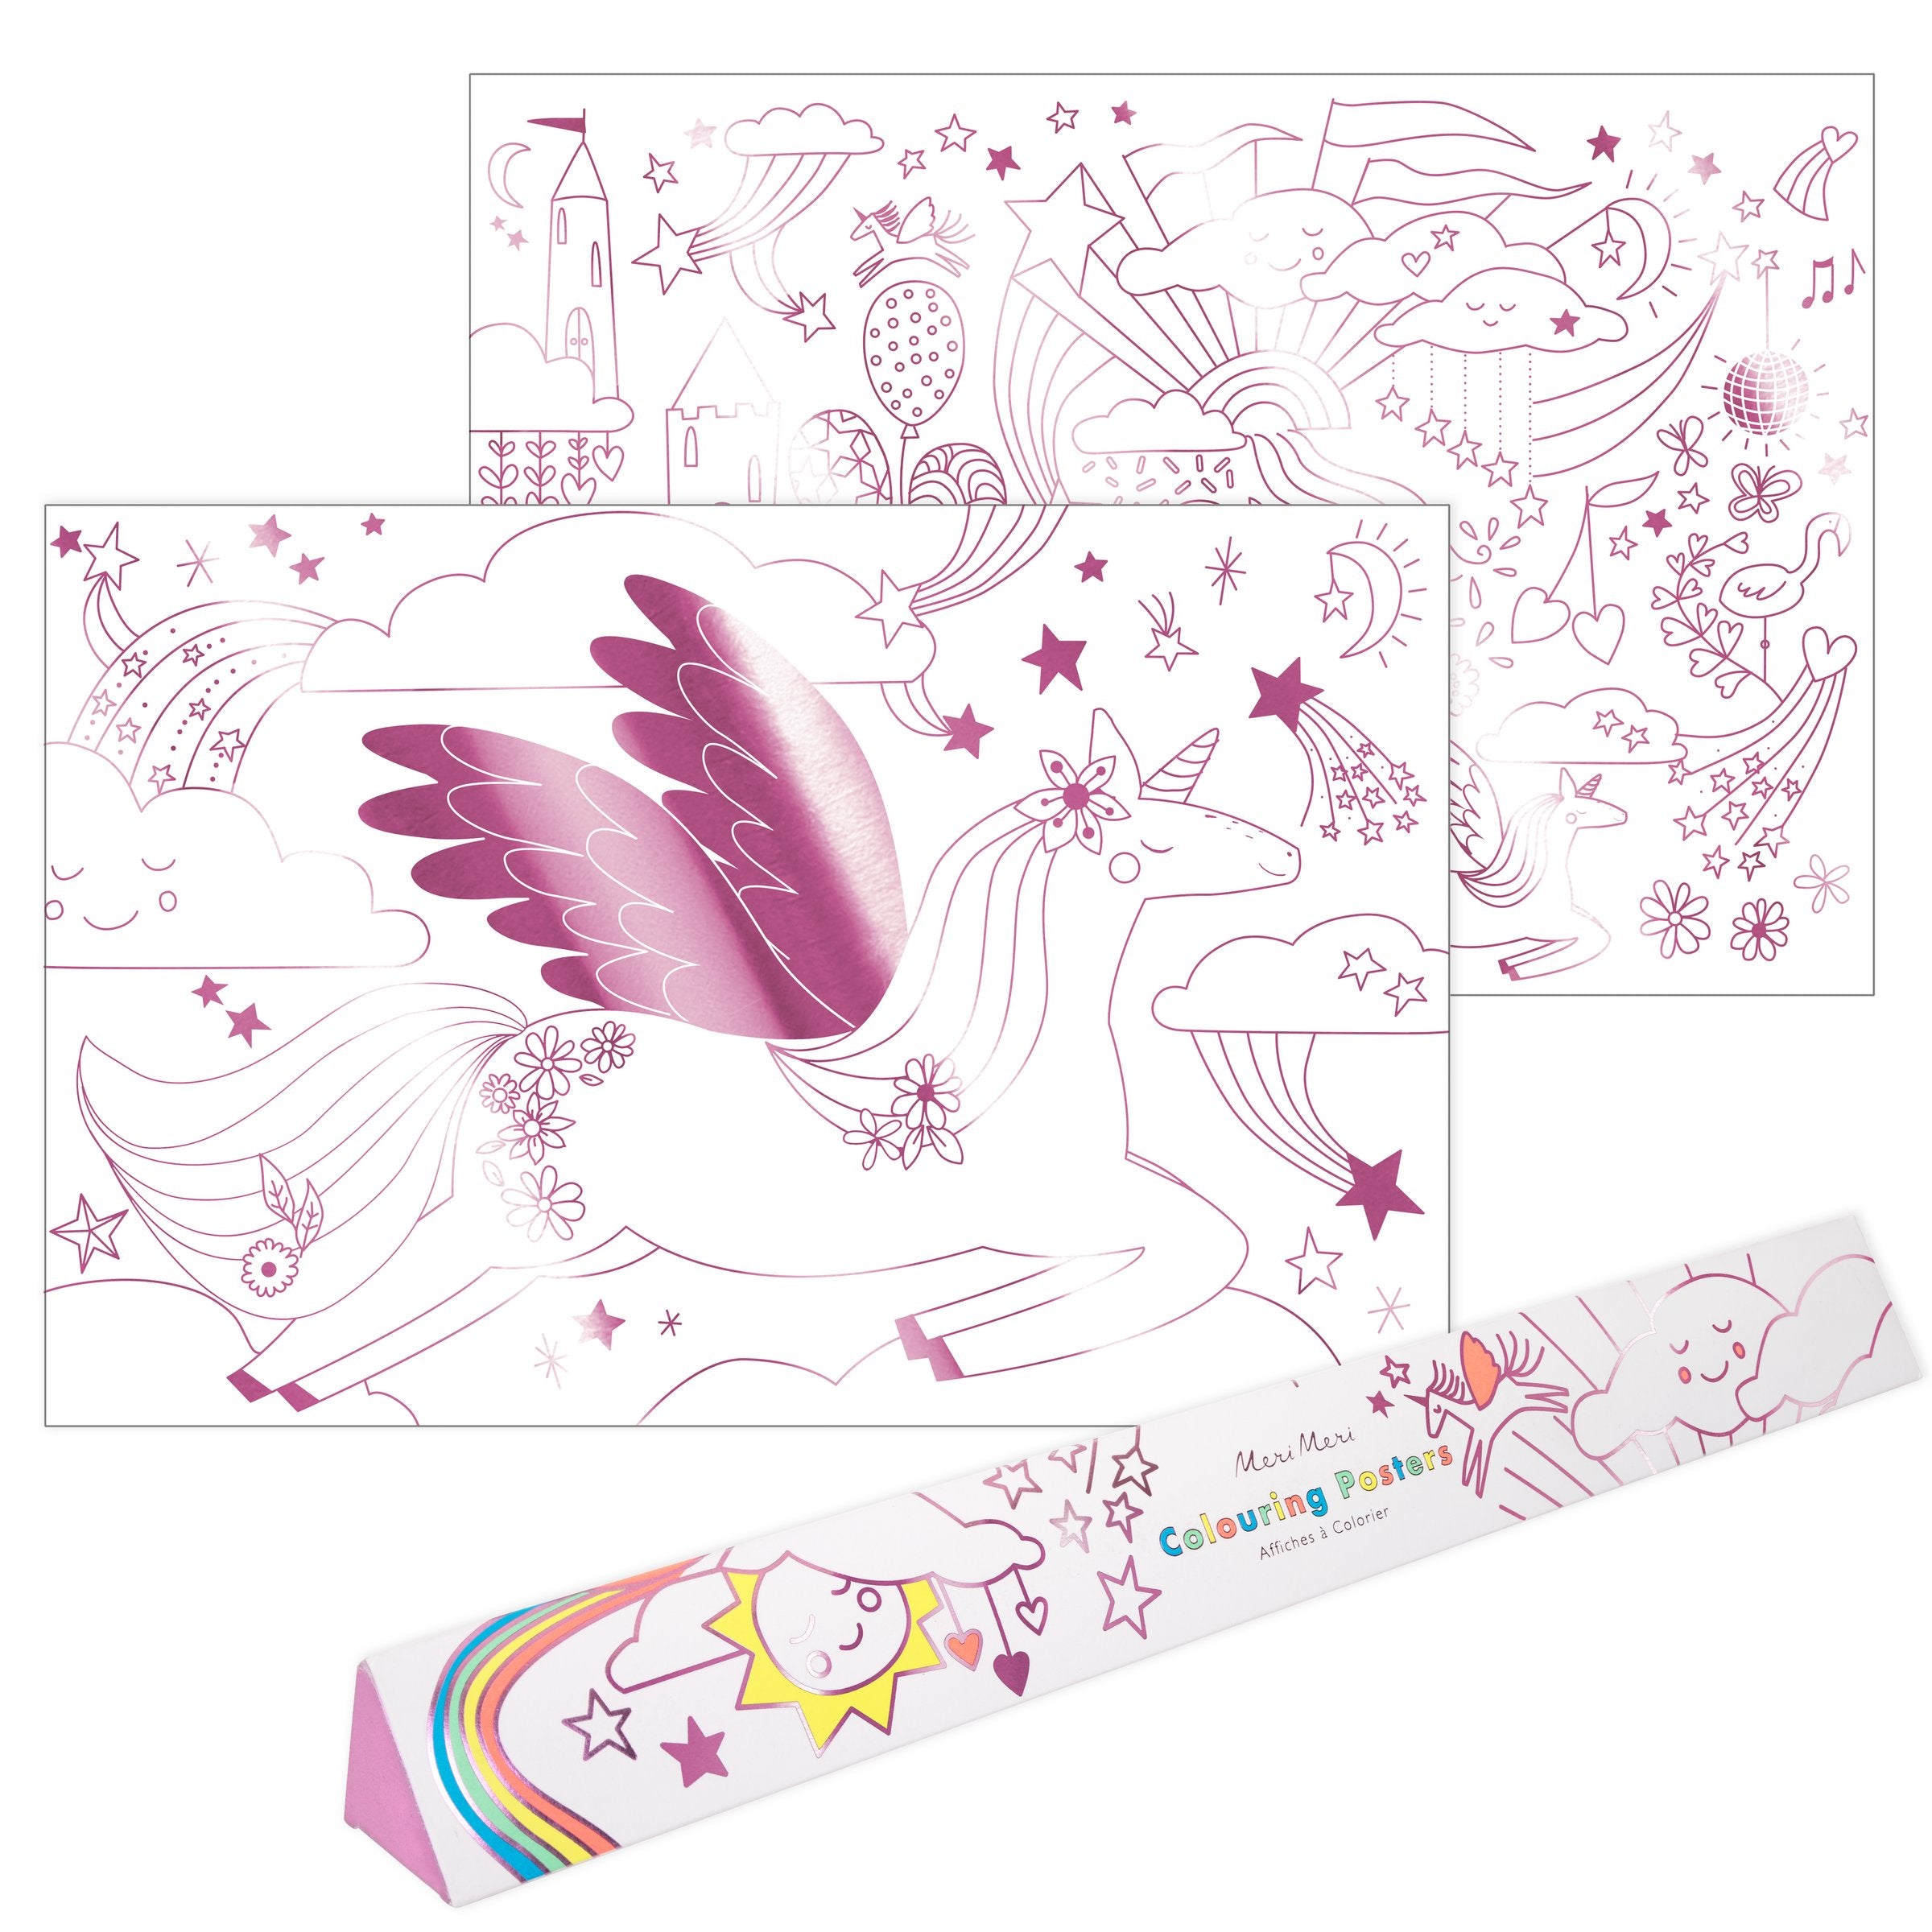 The pink foil illustrations of unicorns in a happy world are fun to colour in.